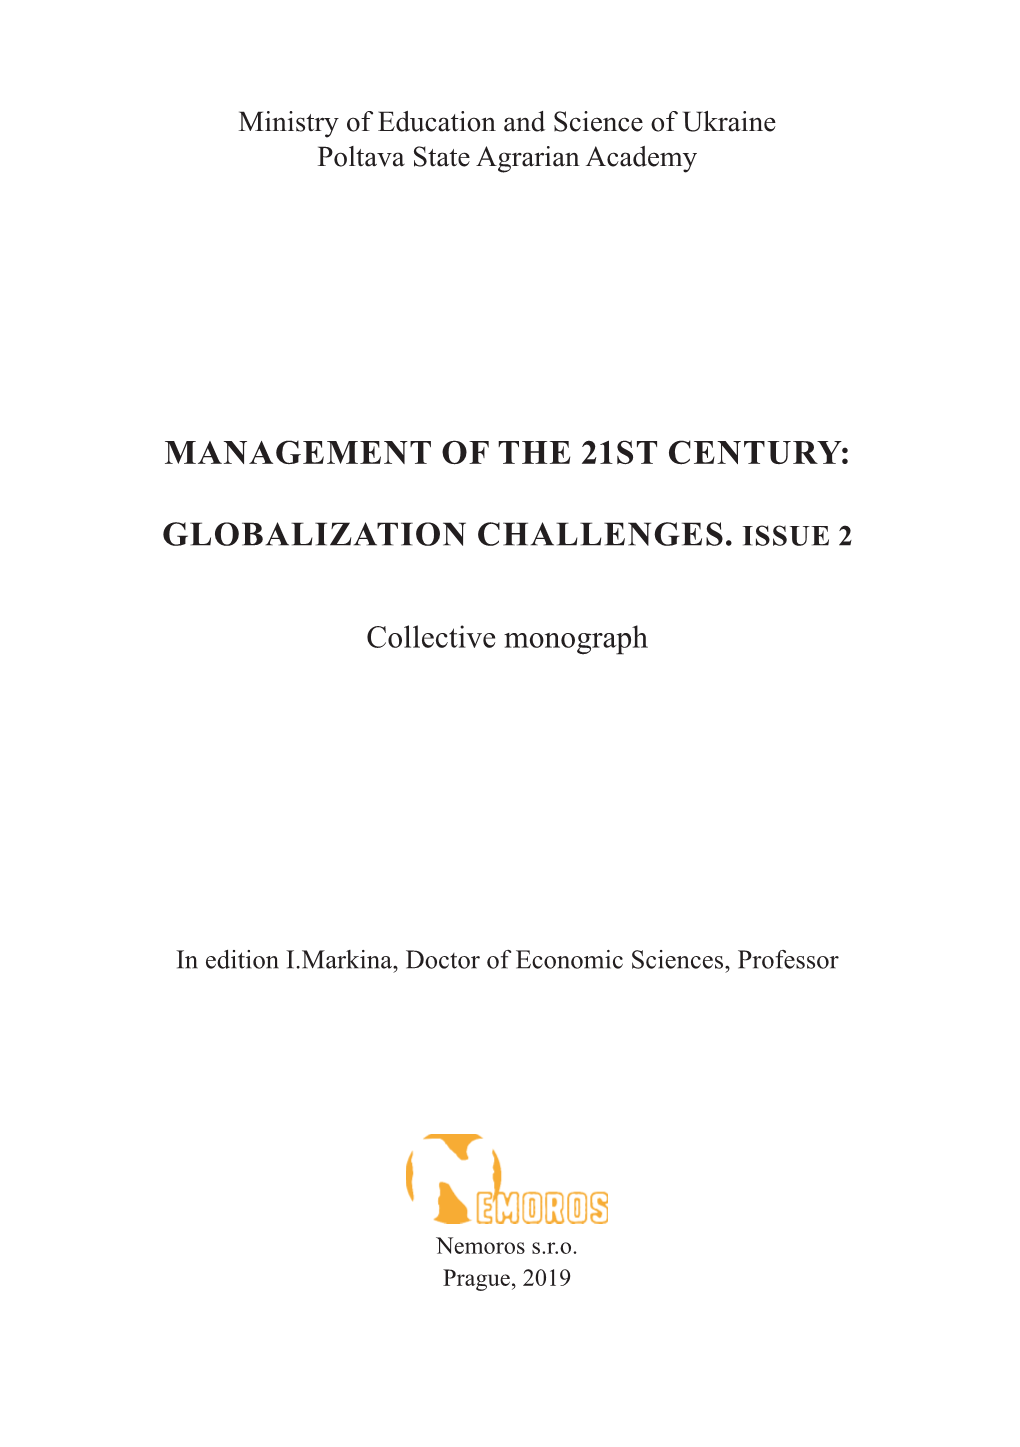 Management of the 21St Century: Globalization Challenges